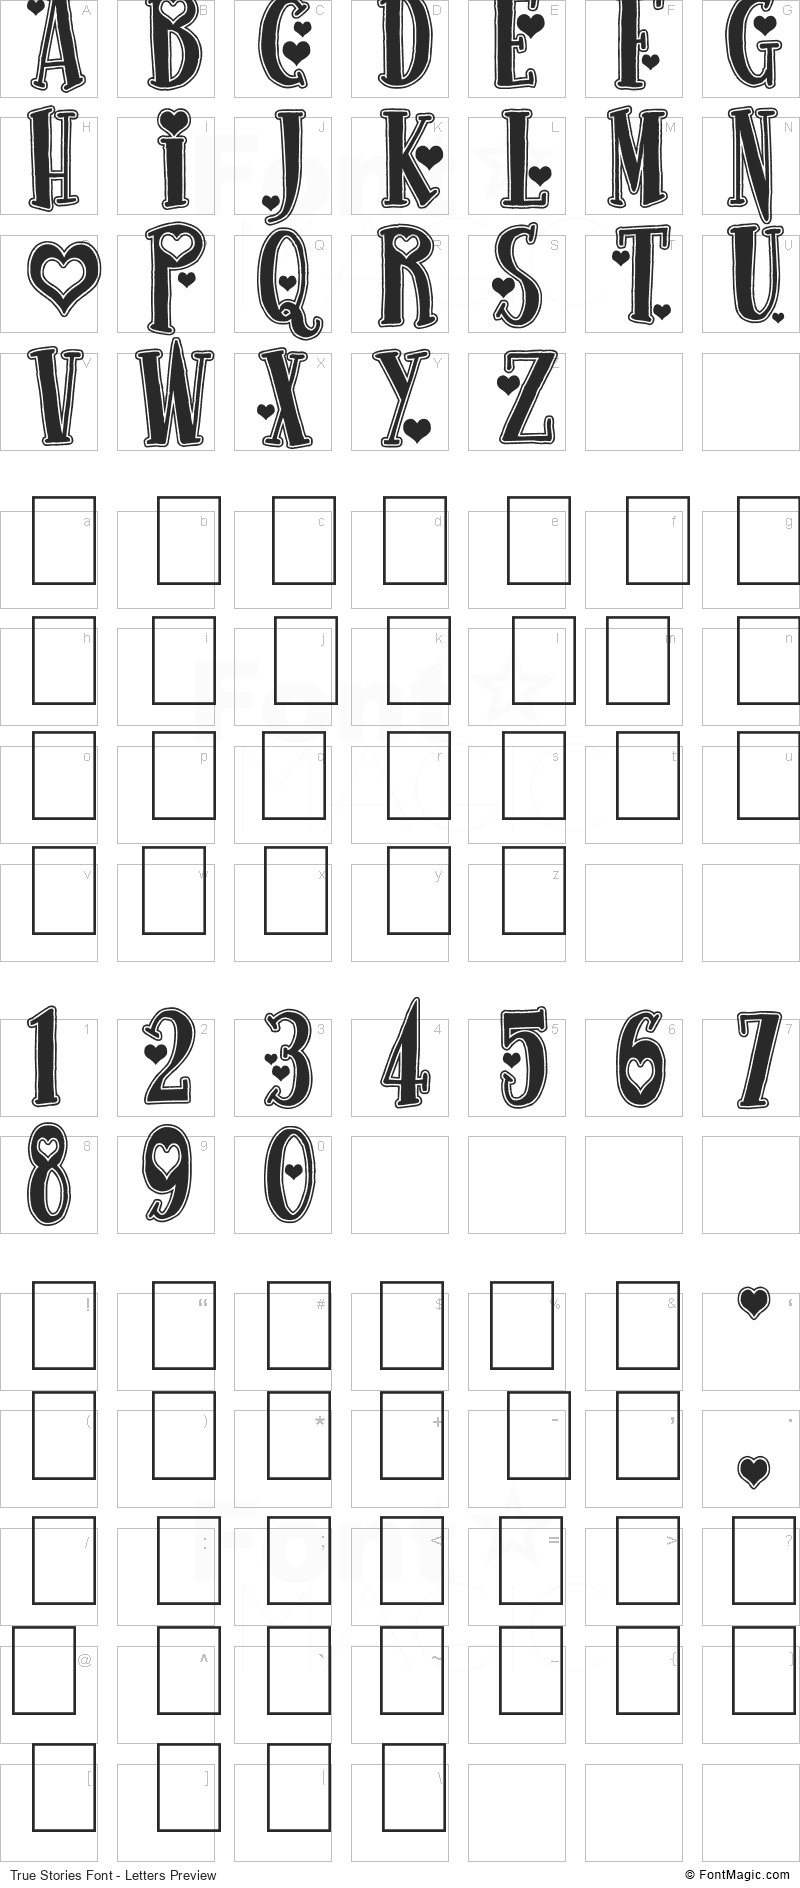 True Stories Font - All Latters Preview Chart